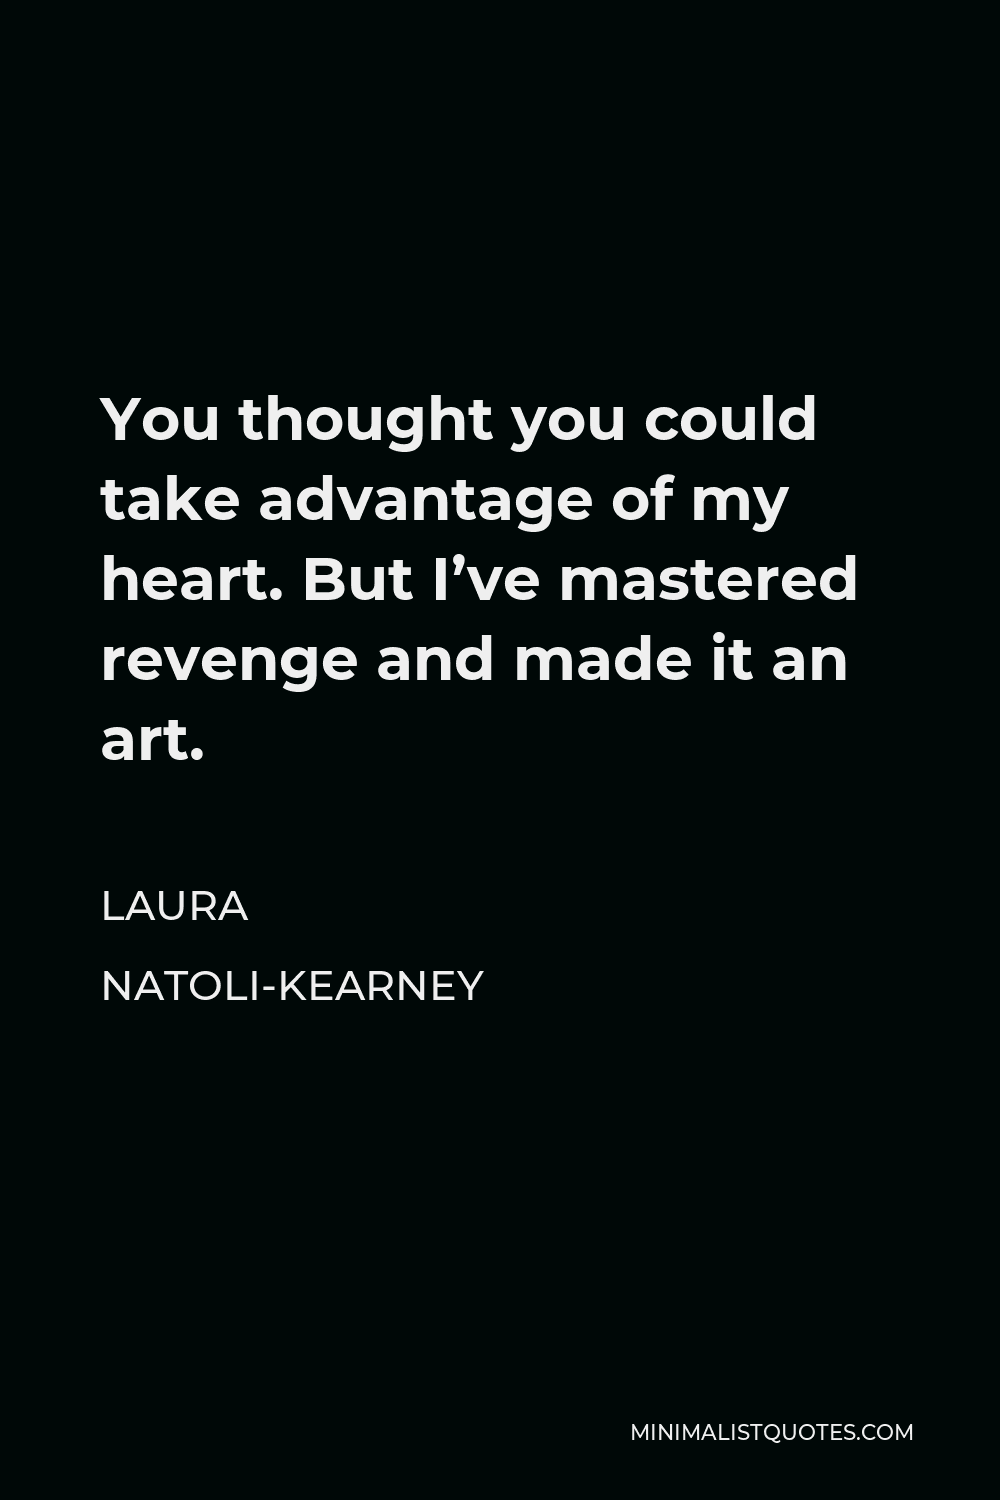 Laura Natoli-Kearney Quote - You thought you could take advantage of my heart. But I’ve mastered revenge and made it an art.